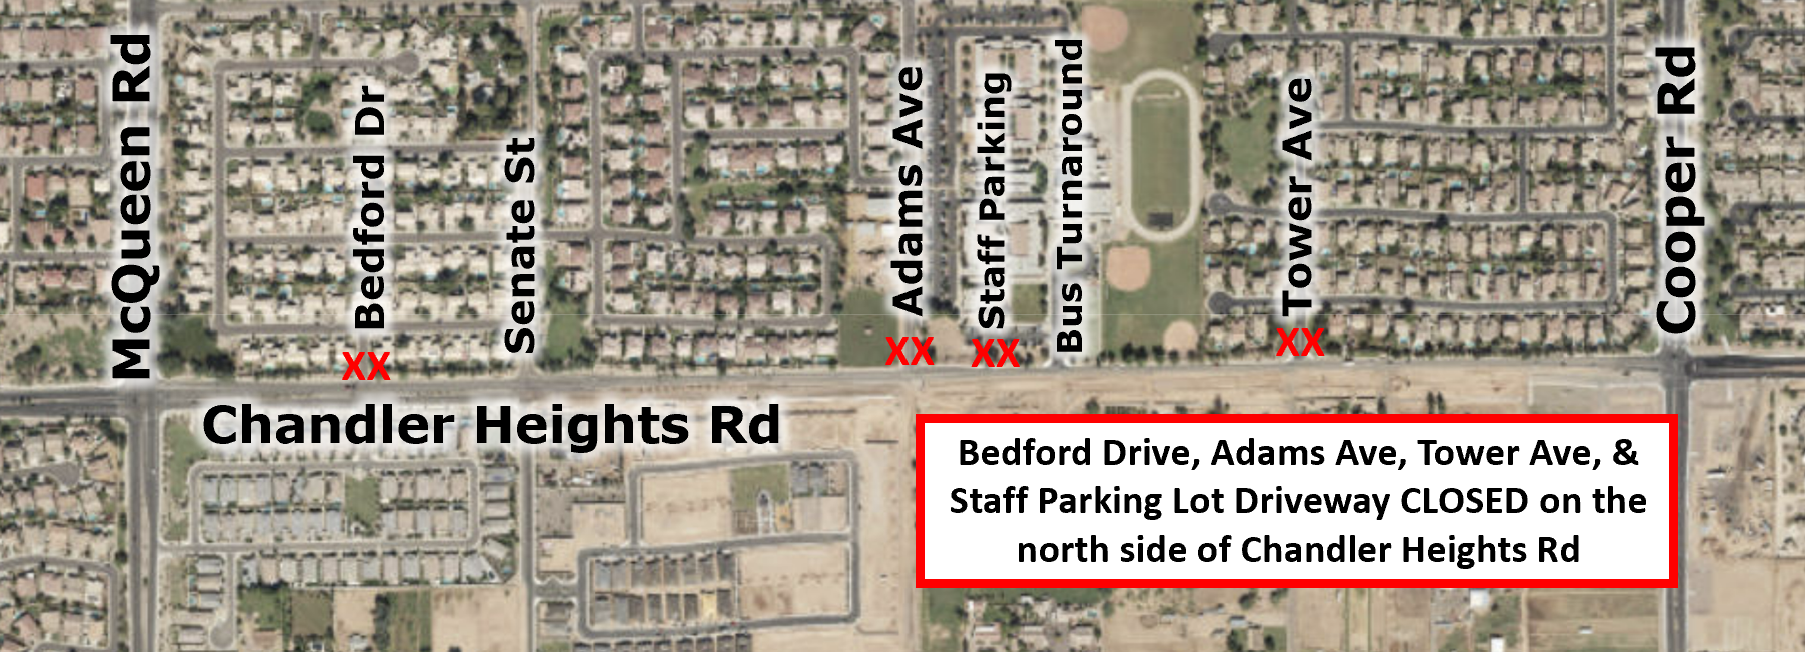 Chandler Heights Road Closure Graphic